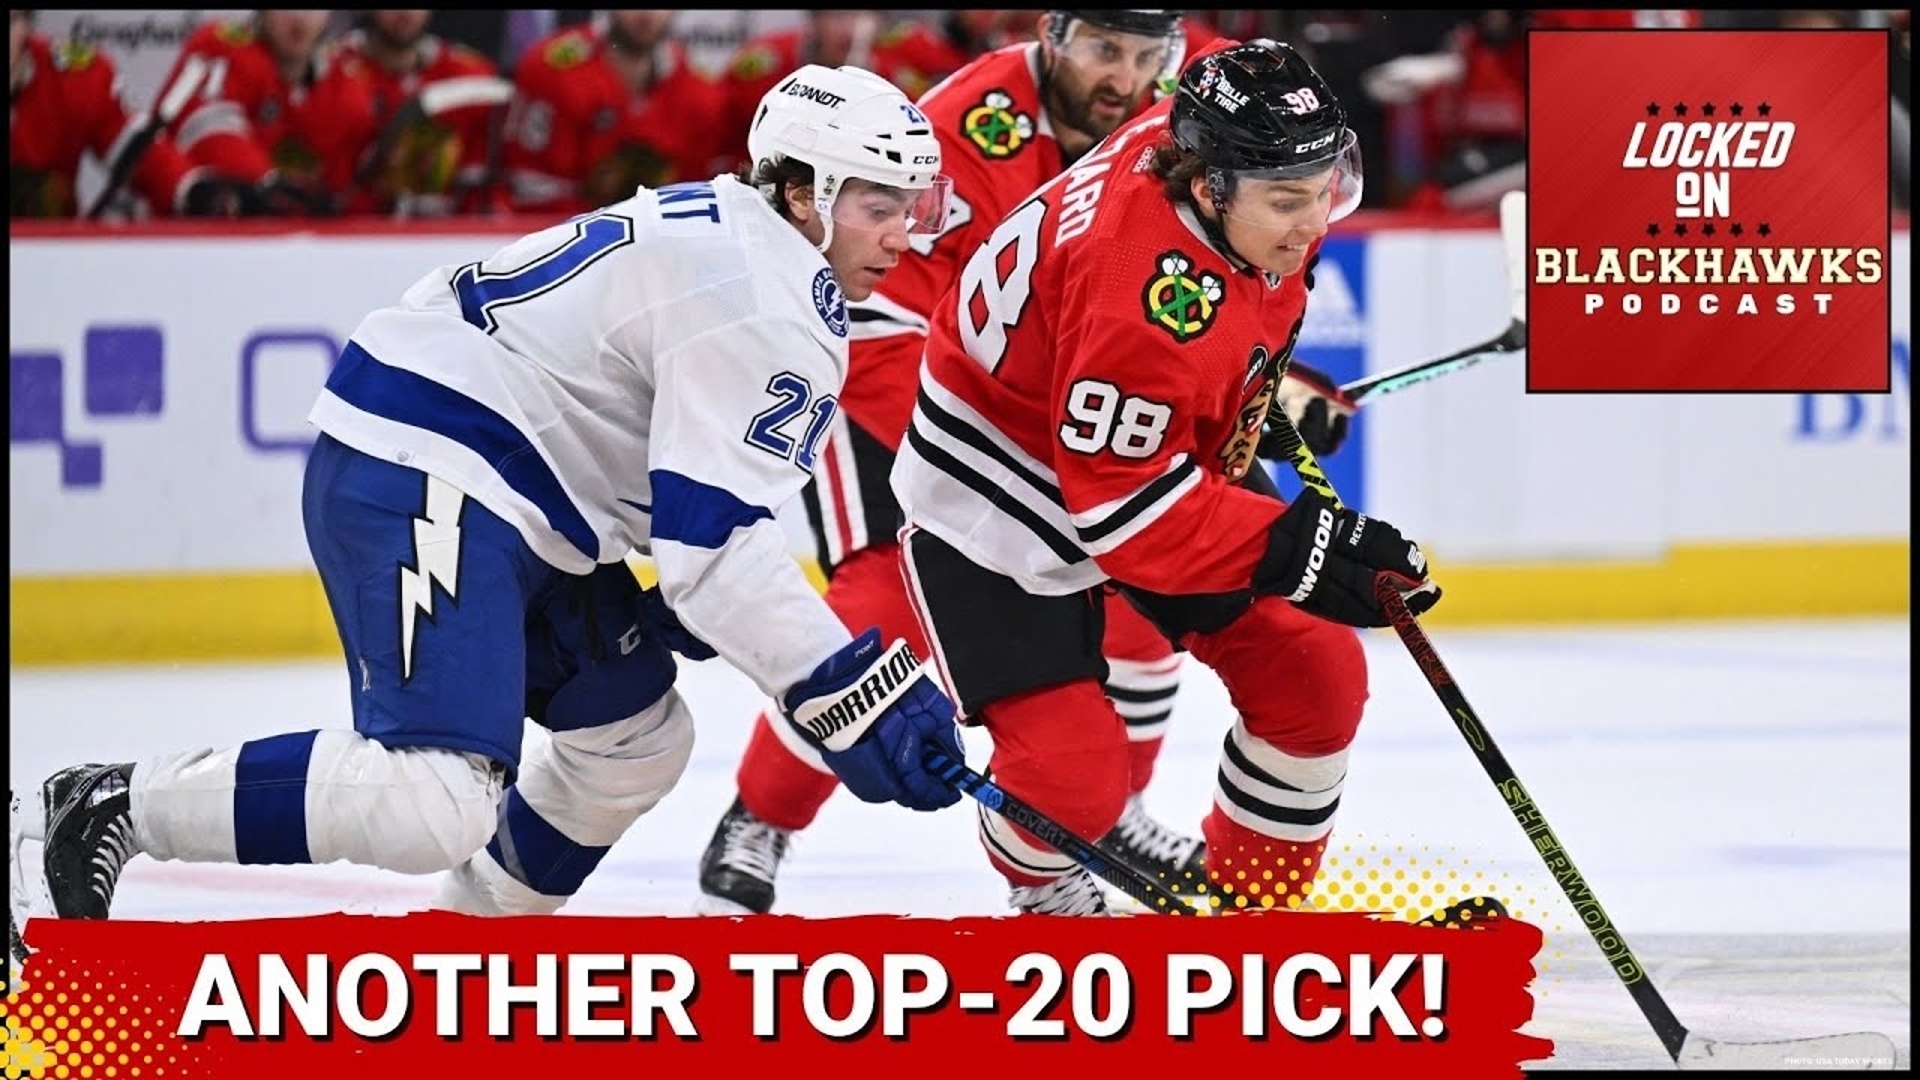 Thursday's episode begins with a discussion on the Chicago Blackhawks officially receiving another top-20 selection in the 2024 NHL Draft.